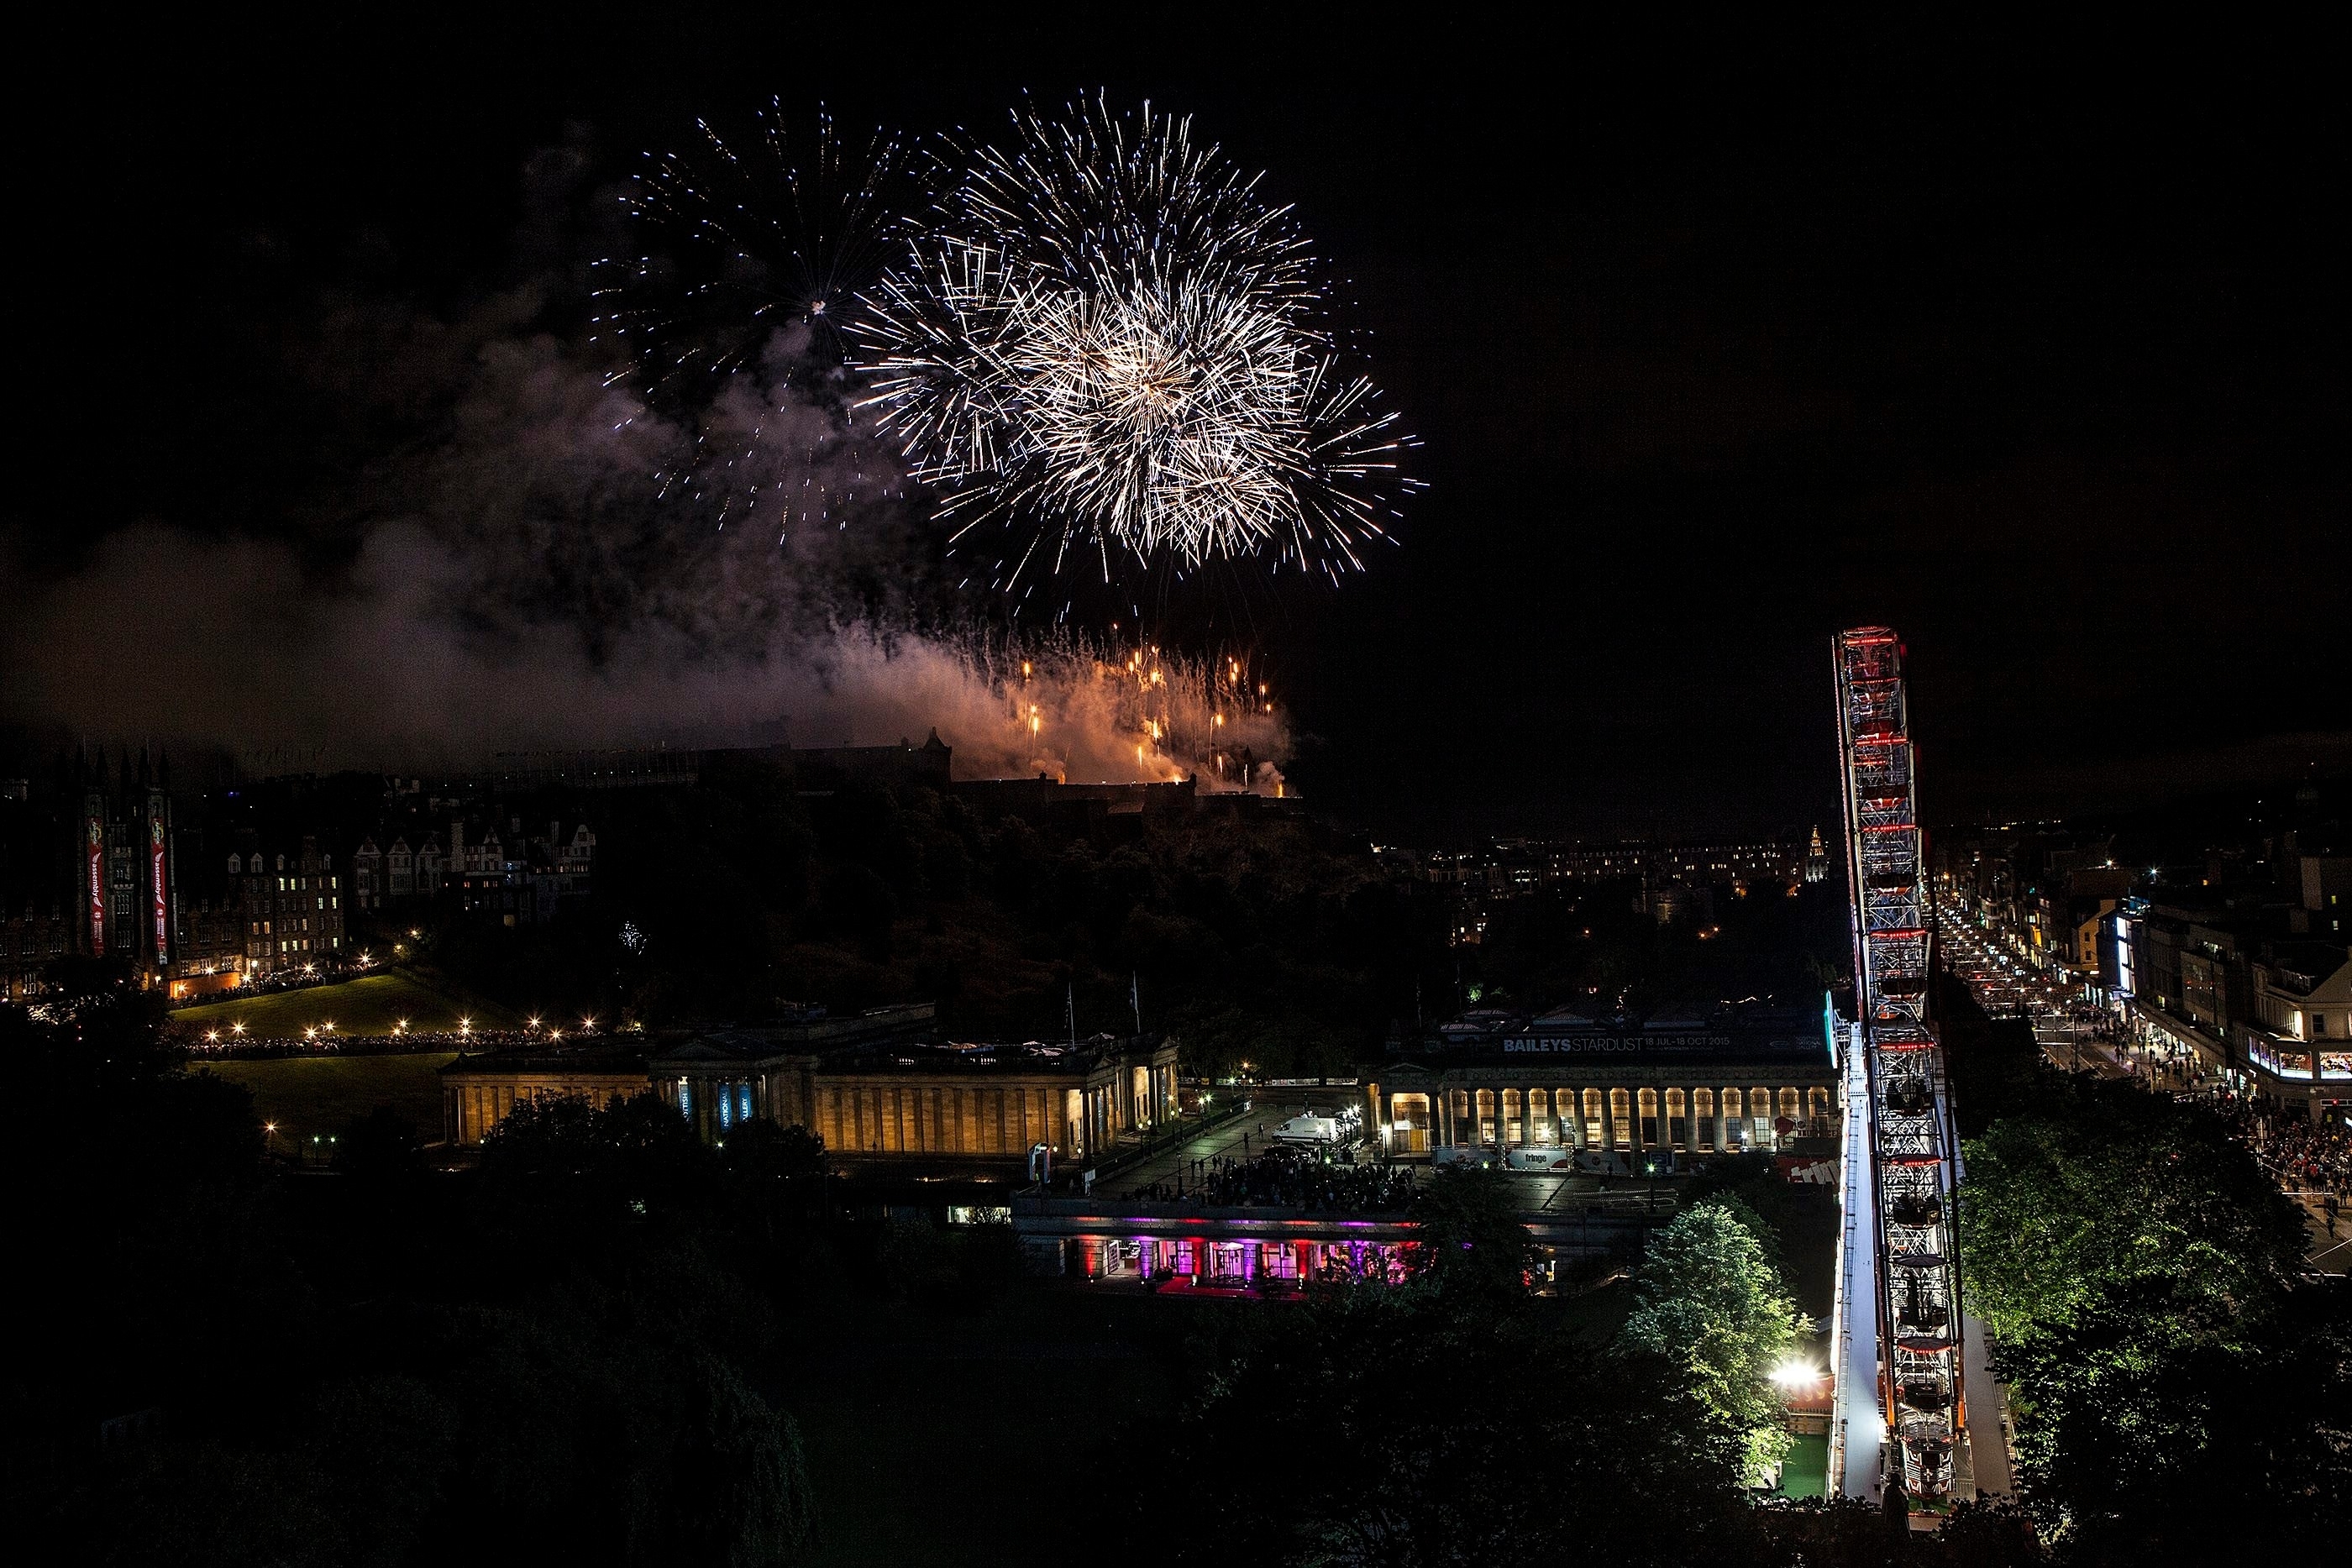 Fireworks light up the sky over Edinburgh to mark the end of the Festivals. The display closes the festival season with a 45 minute concert and more than 400,000 fireworks, choreographed to live orchestral music against the backdrop of Edinburgh Castle. August 31 2015